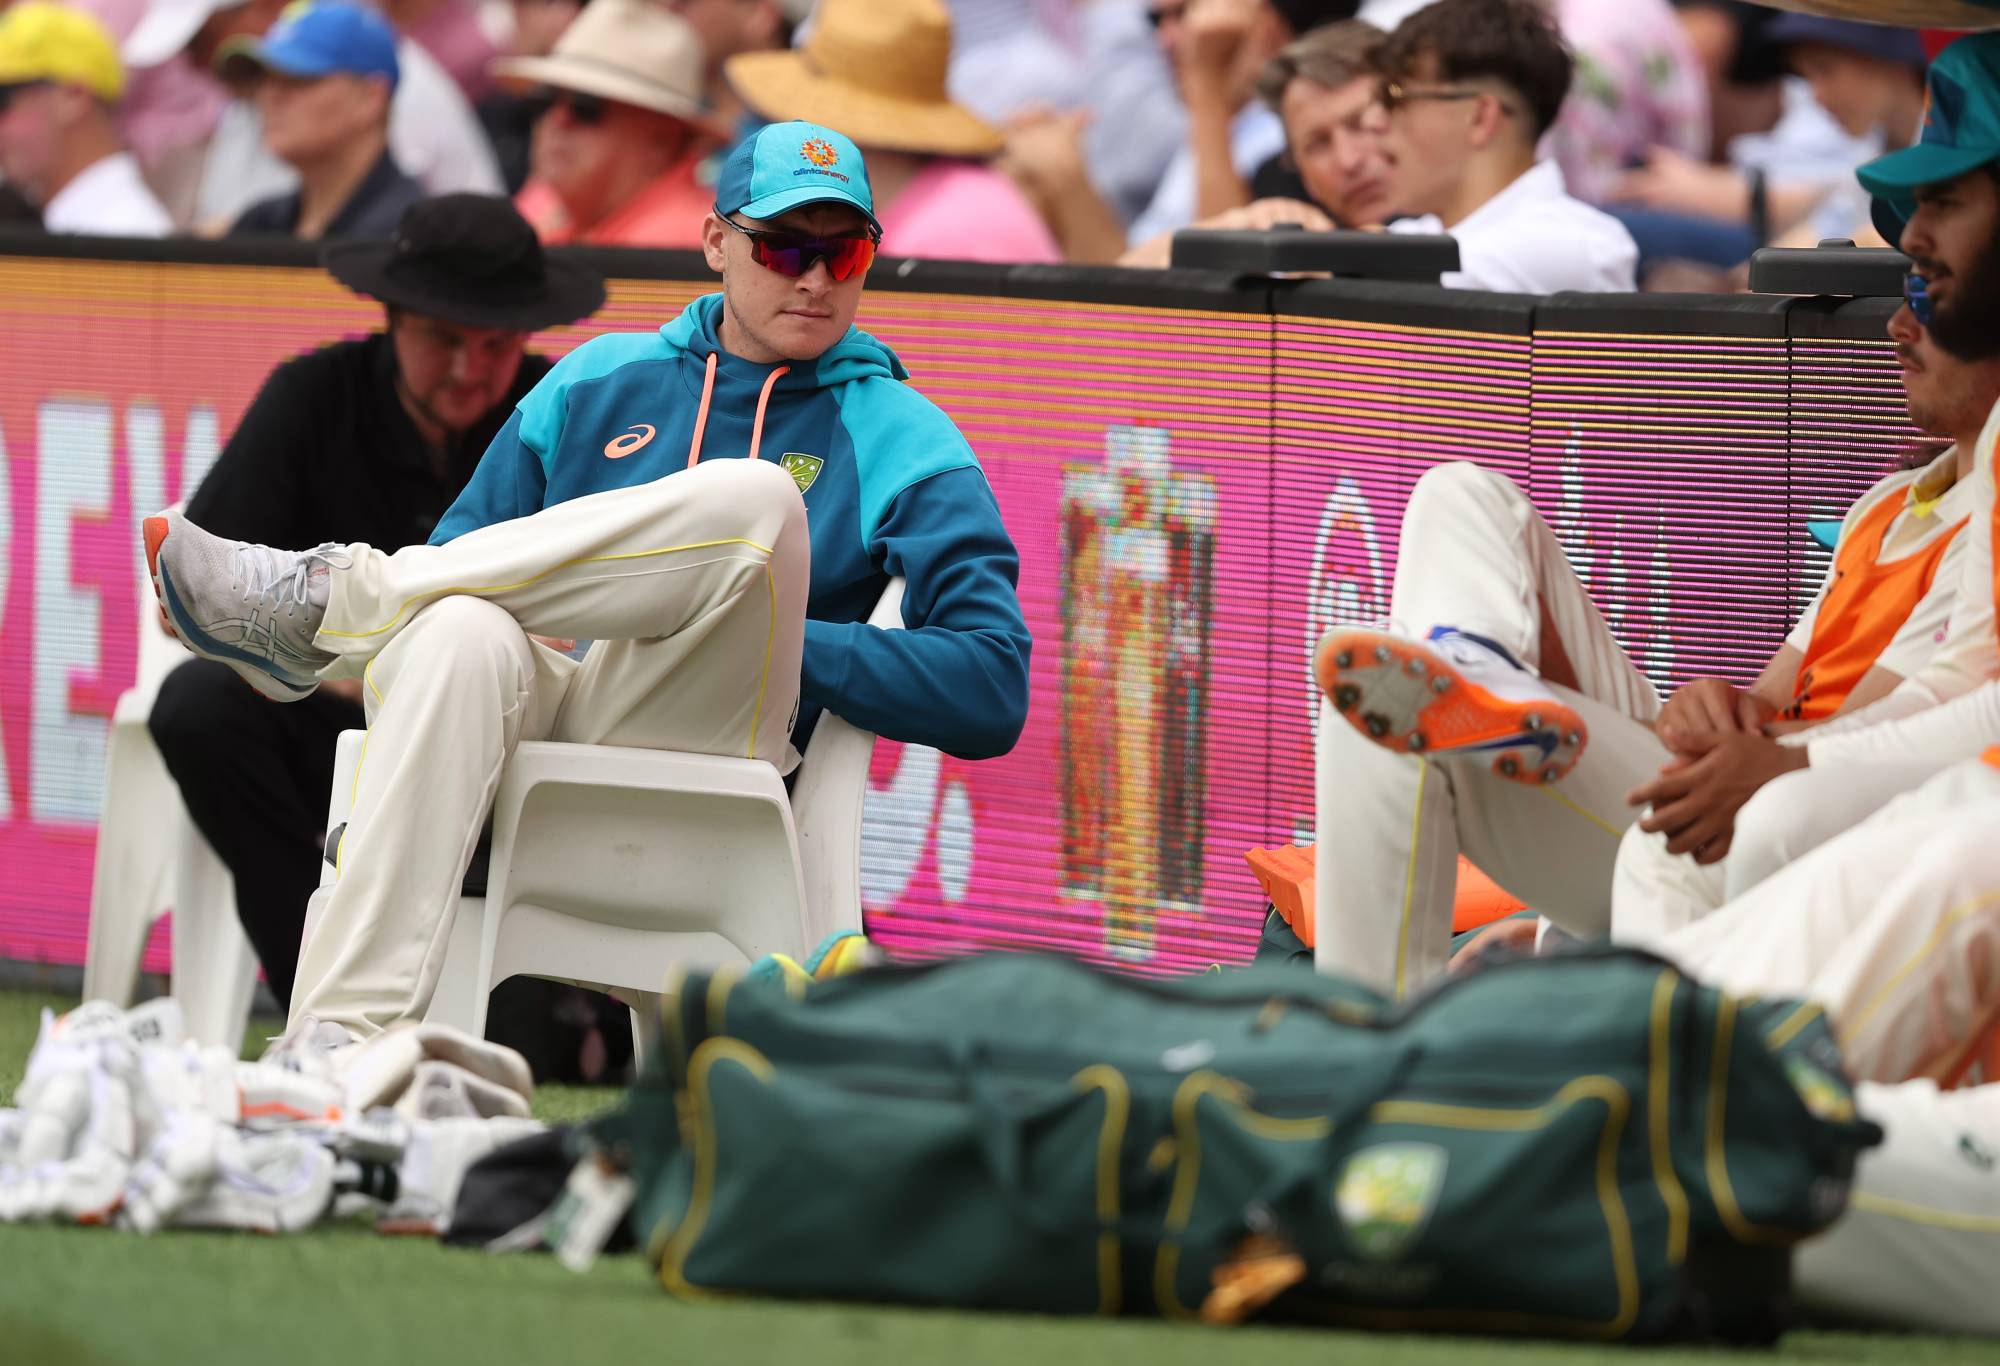 SYDNEY, AUSTRALIA - JANUARY 04: Matt Renshaw of Australia looks on during day one of the Third Test match in the series between Australia and South Africa at Sydney Cricket Ground on January 04, 2023 in Sydney, Australia. (Photo by Mark Kolbe/Getty Images)